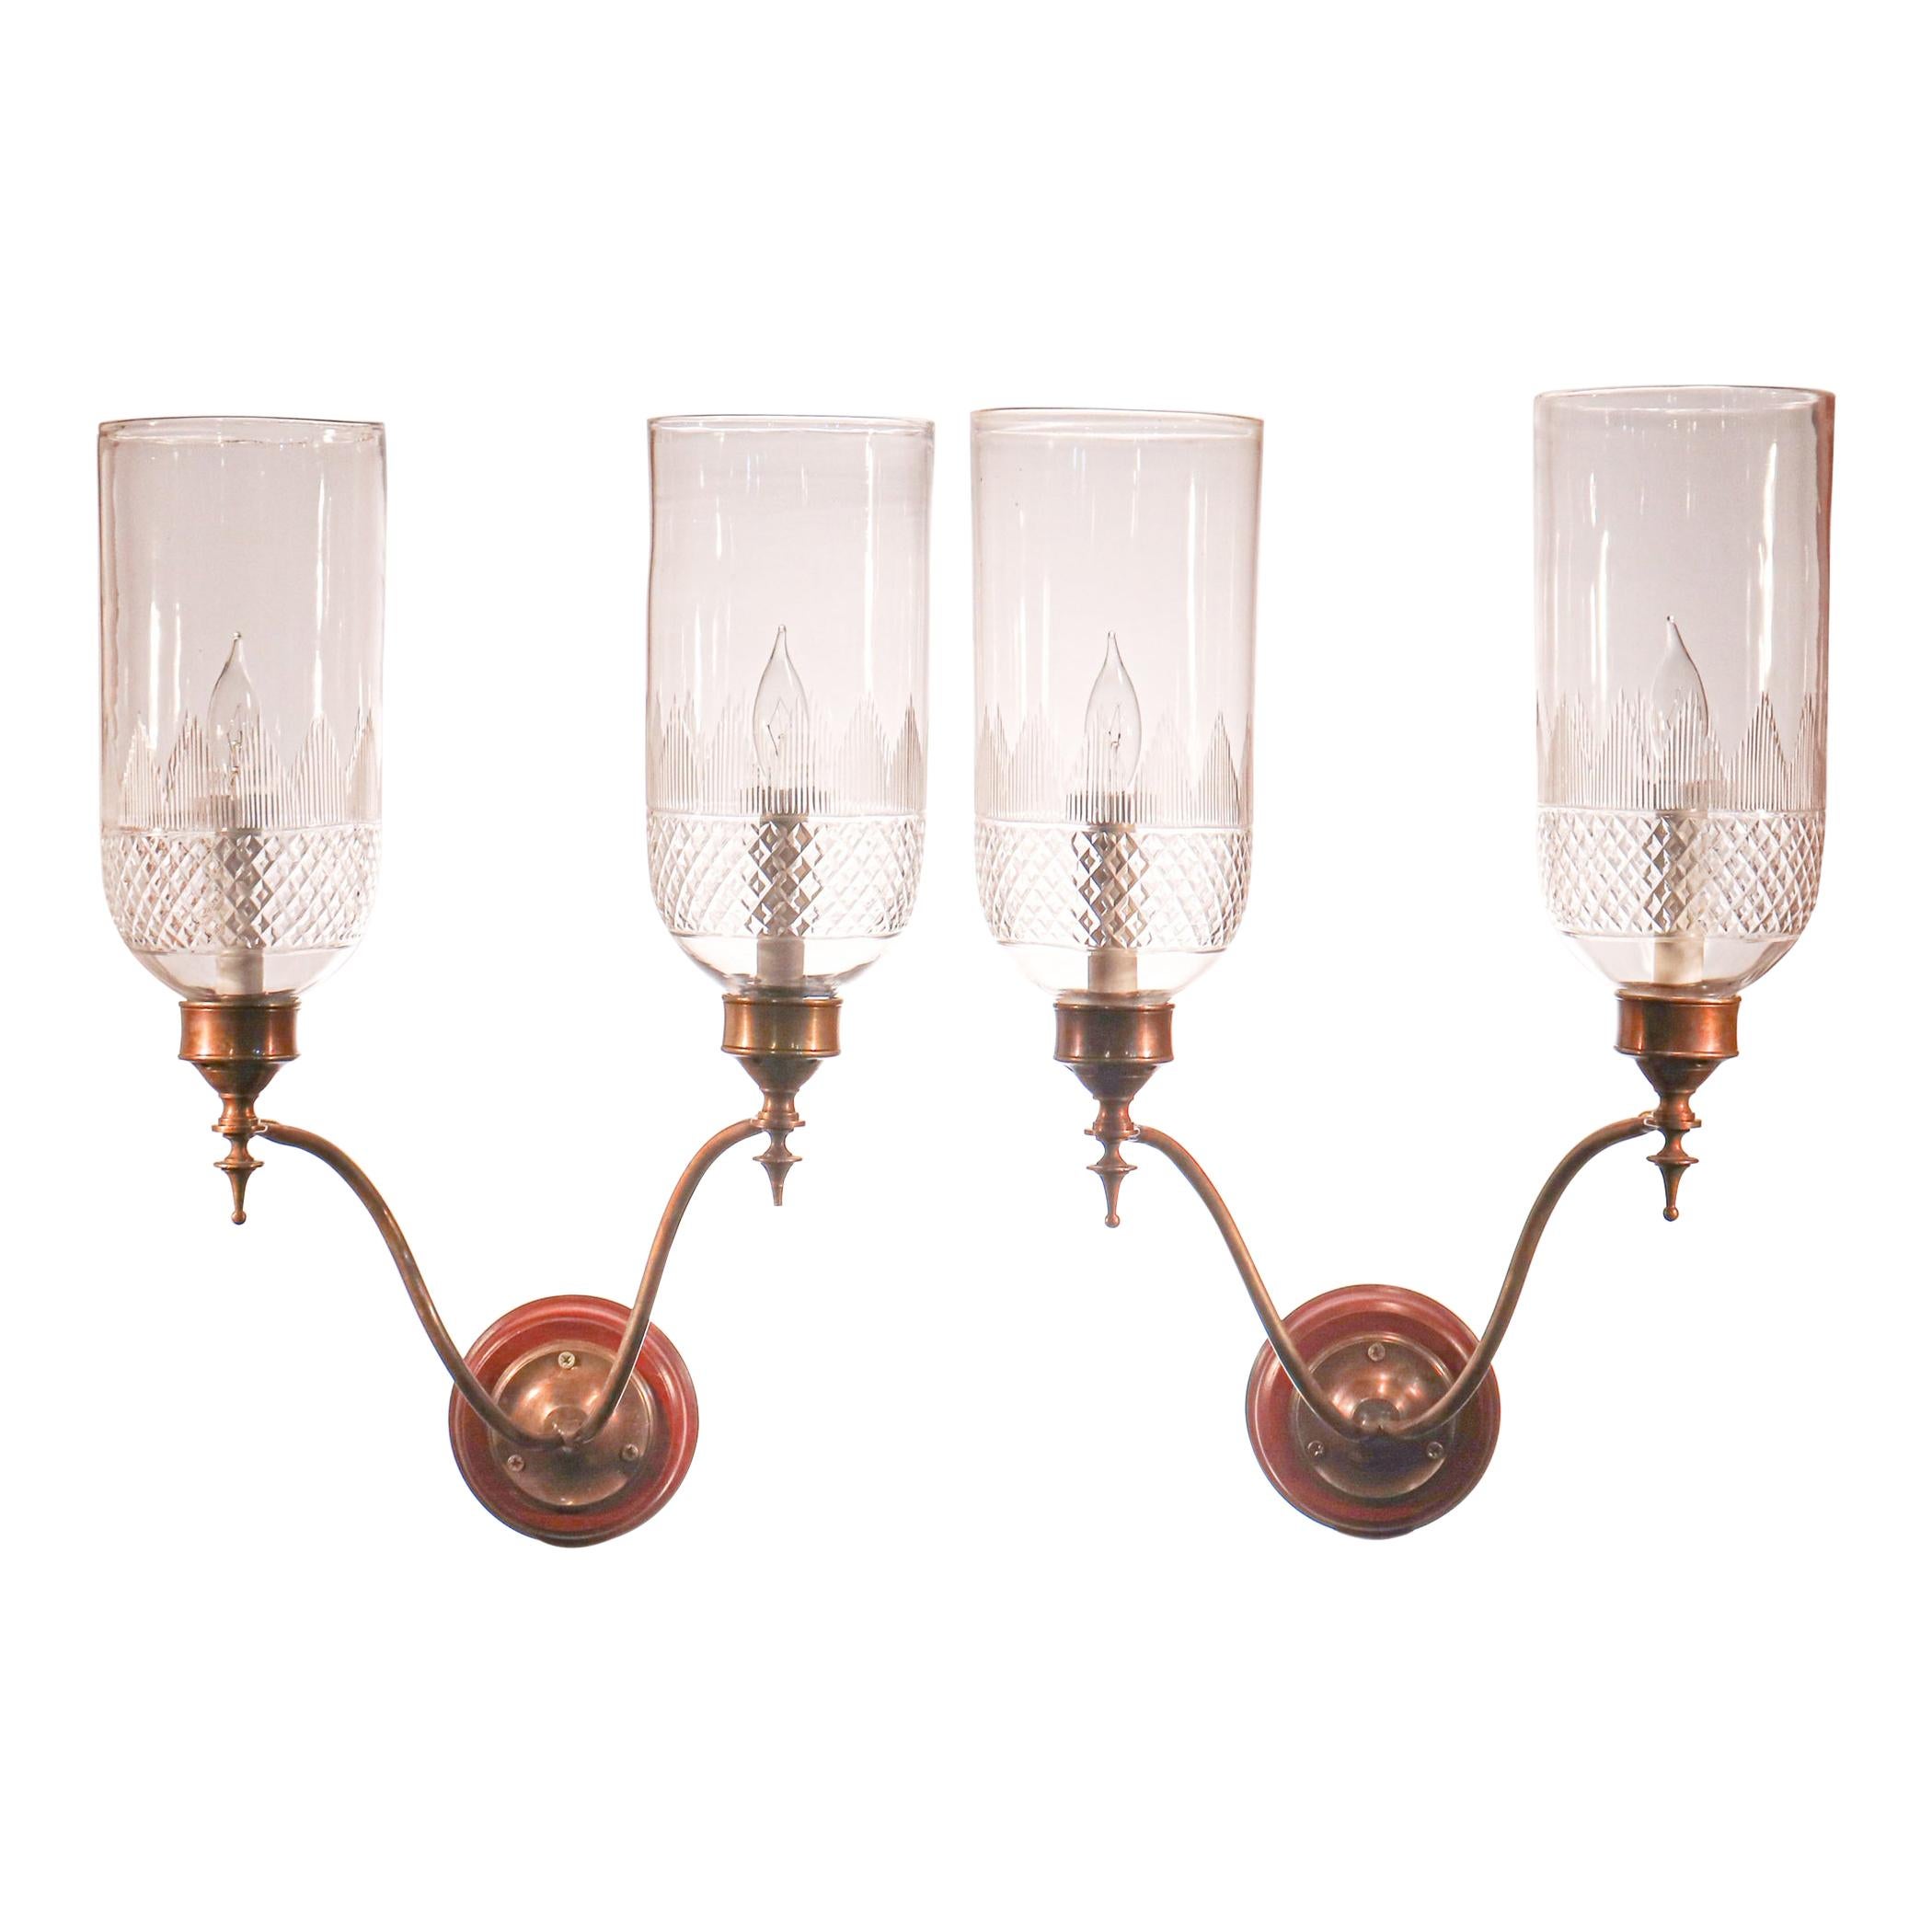 Pair of 19th Century Hurricane Shade Double-Arm Wall Sconces